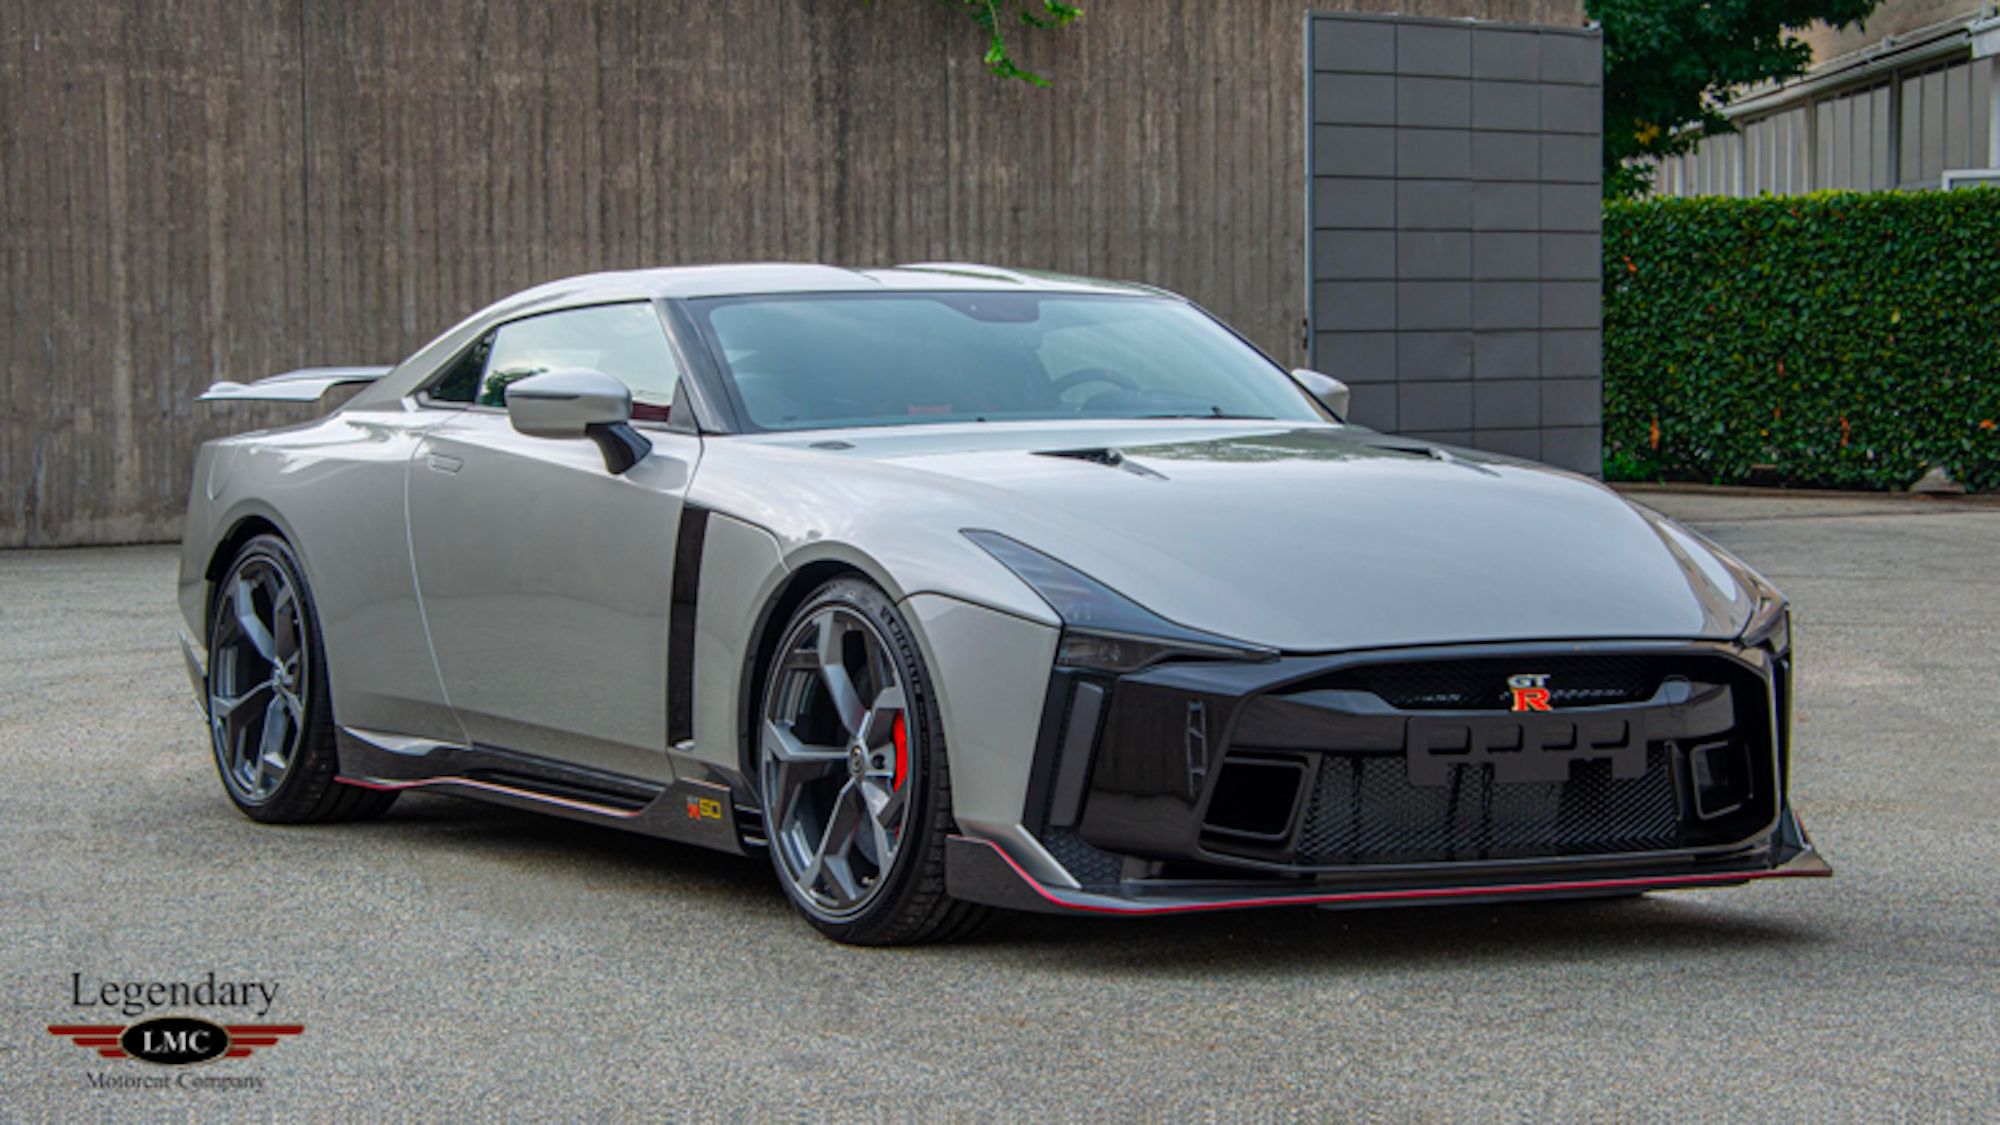 A Rare Nissan GT-R50 Has Come Up For Sale